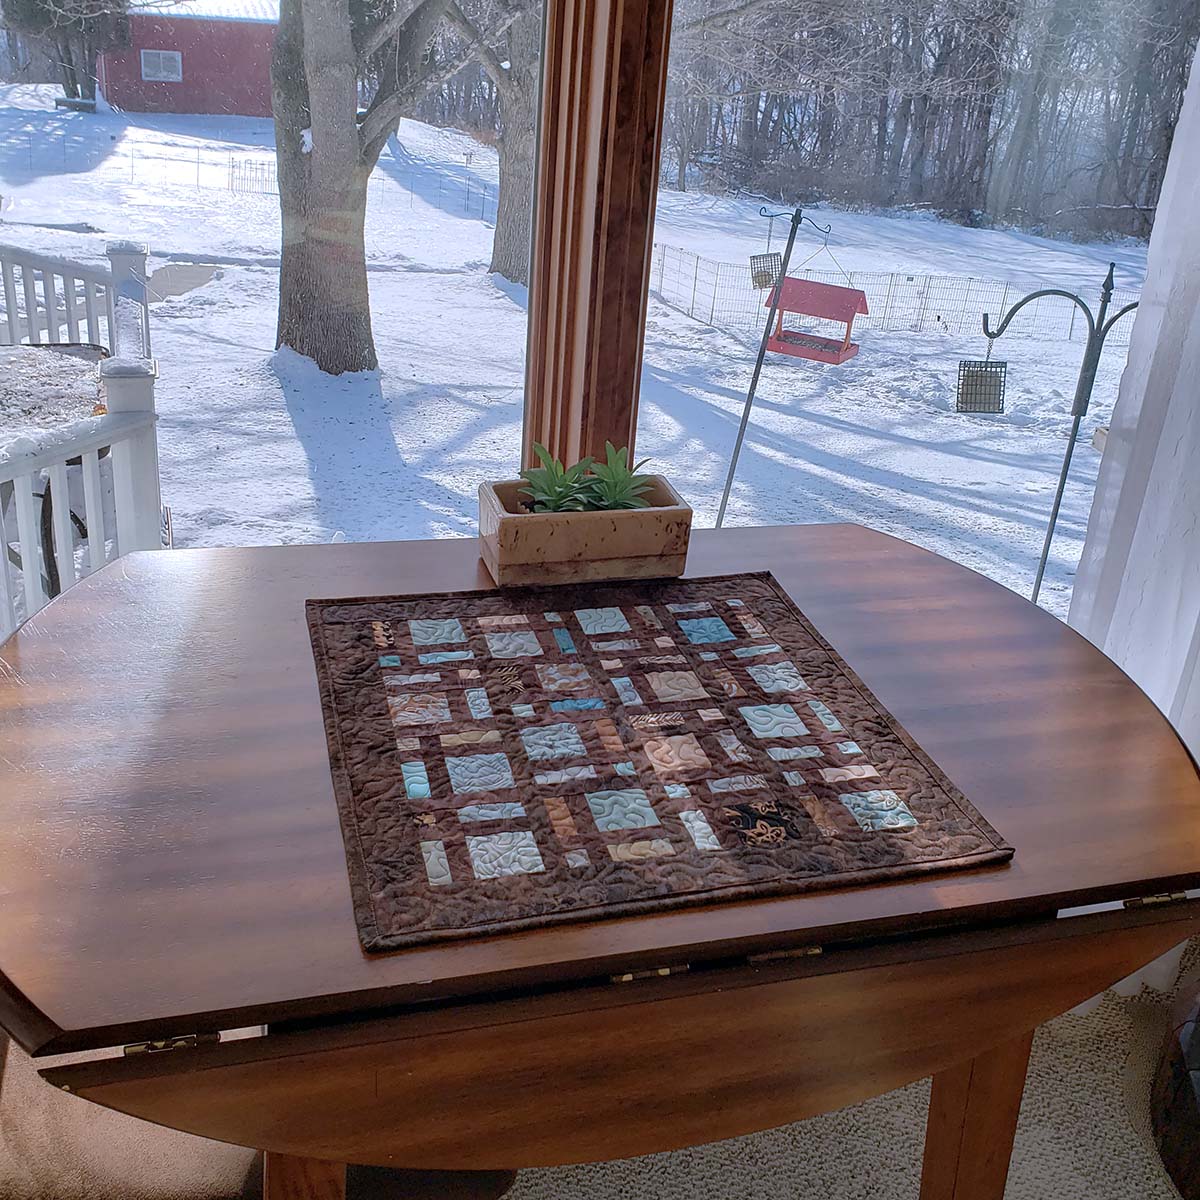 Mini Scattered table topper on a small table